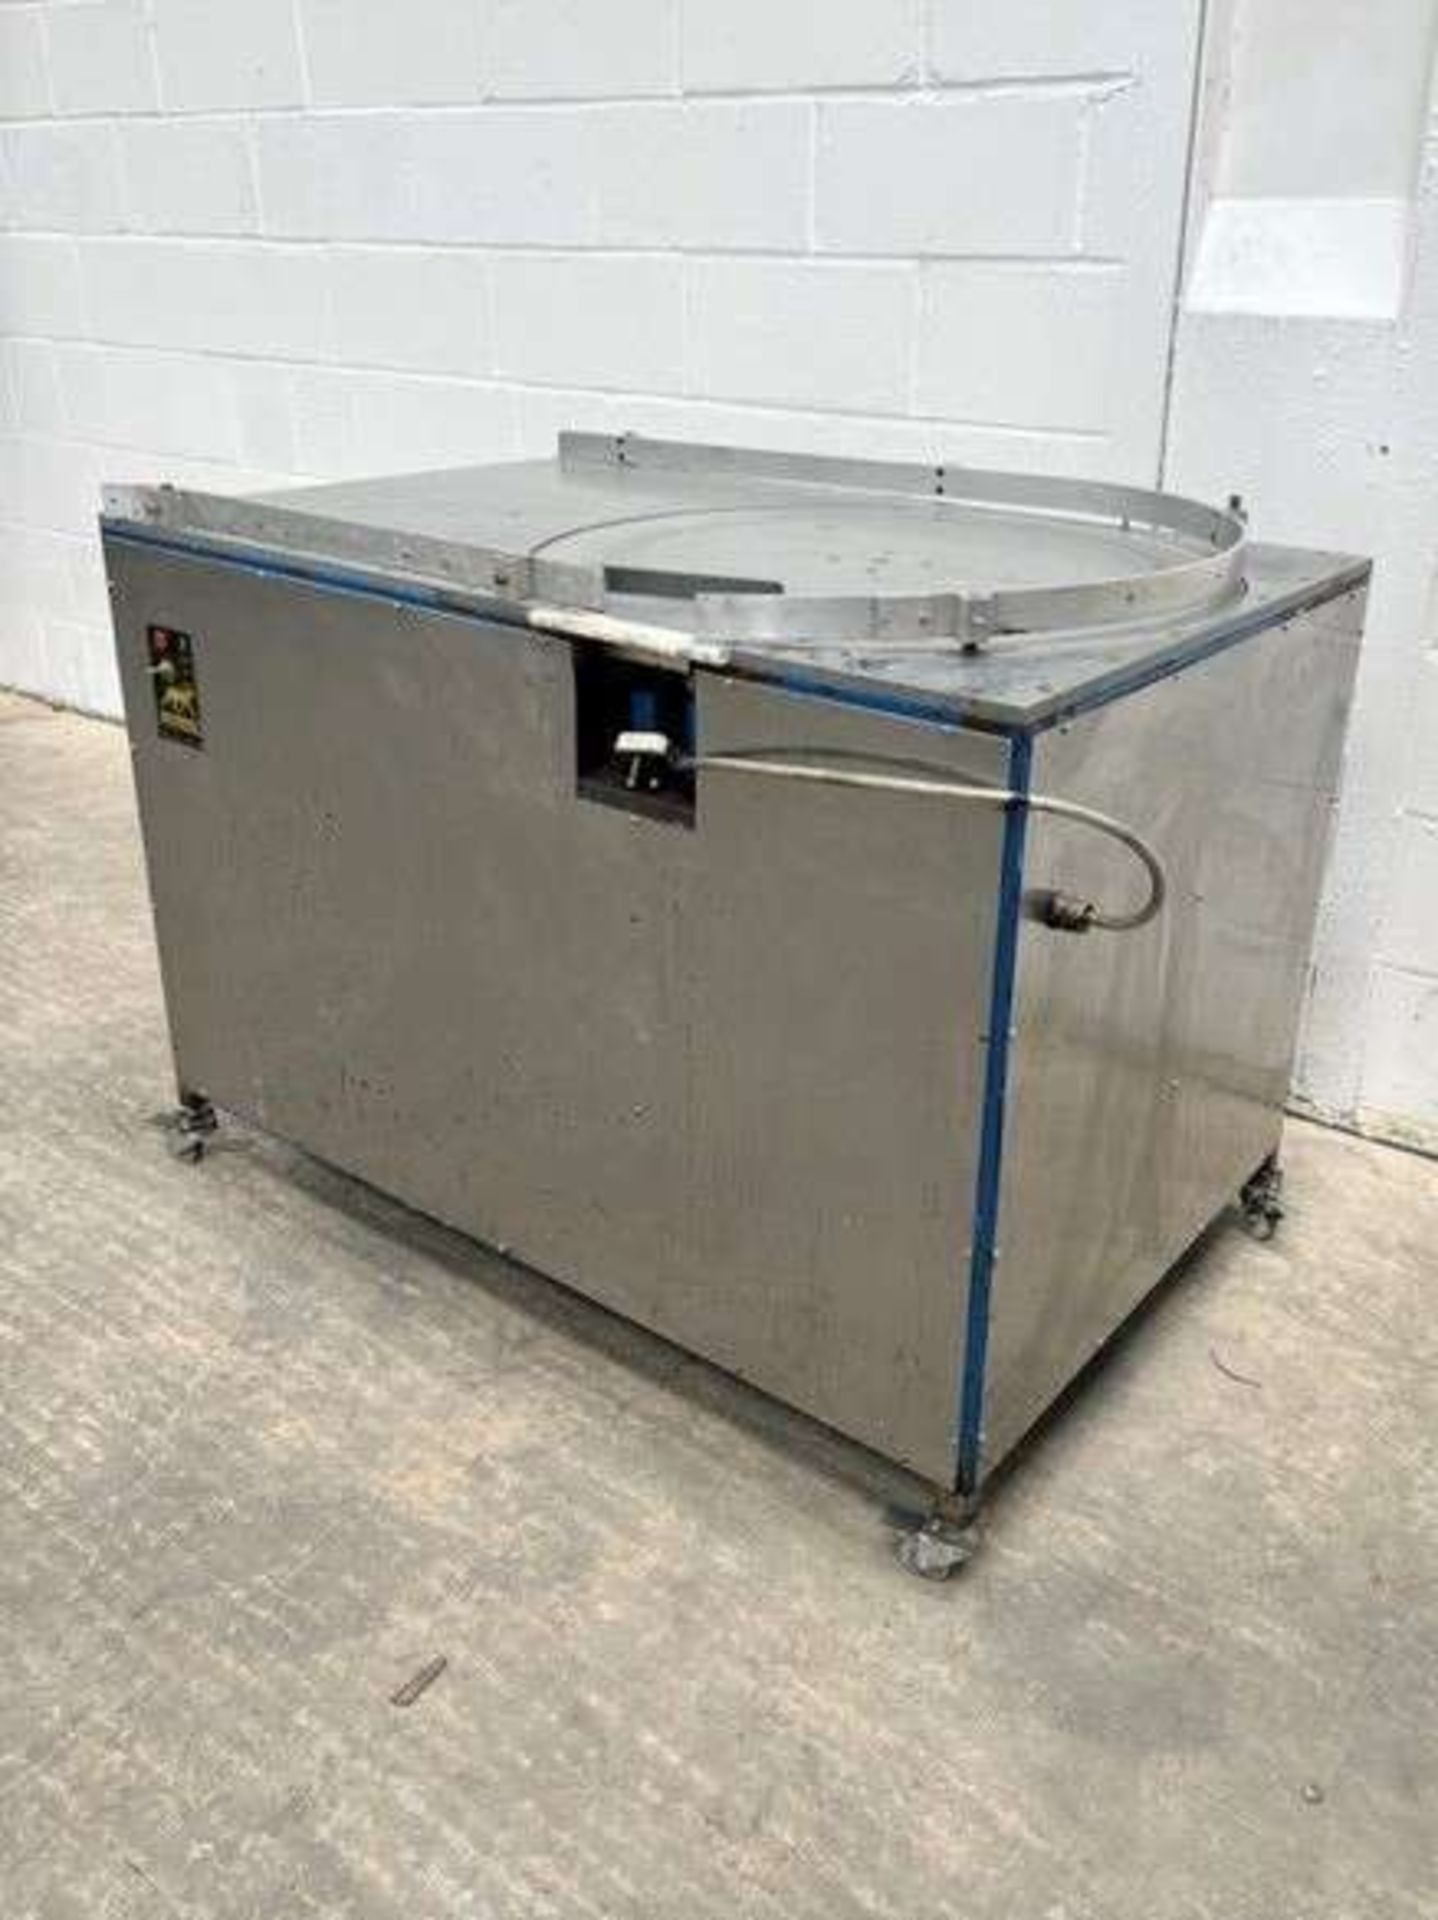 Stainless Steel Rotary Table 1000mm DIA with built in loading / off-loading bay - Image 3 of 4